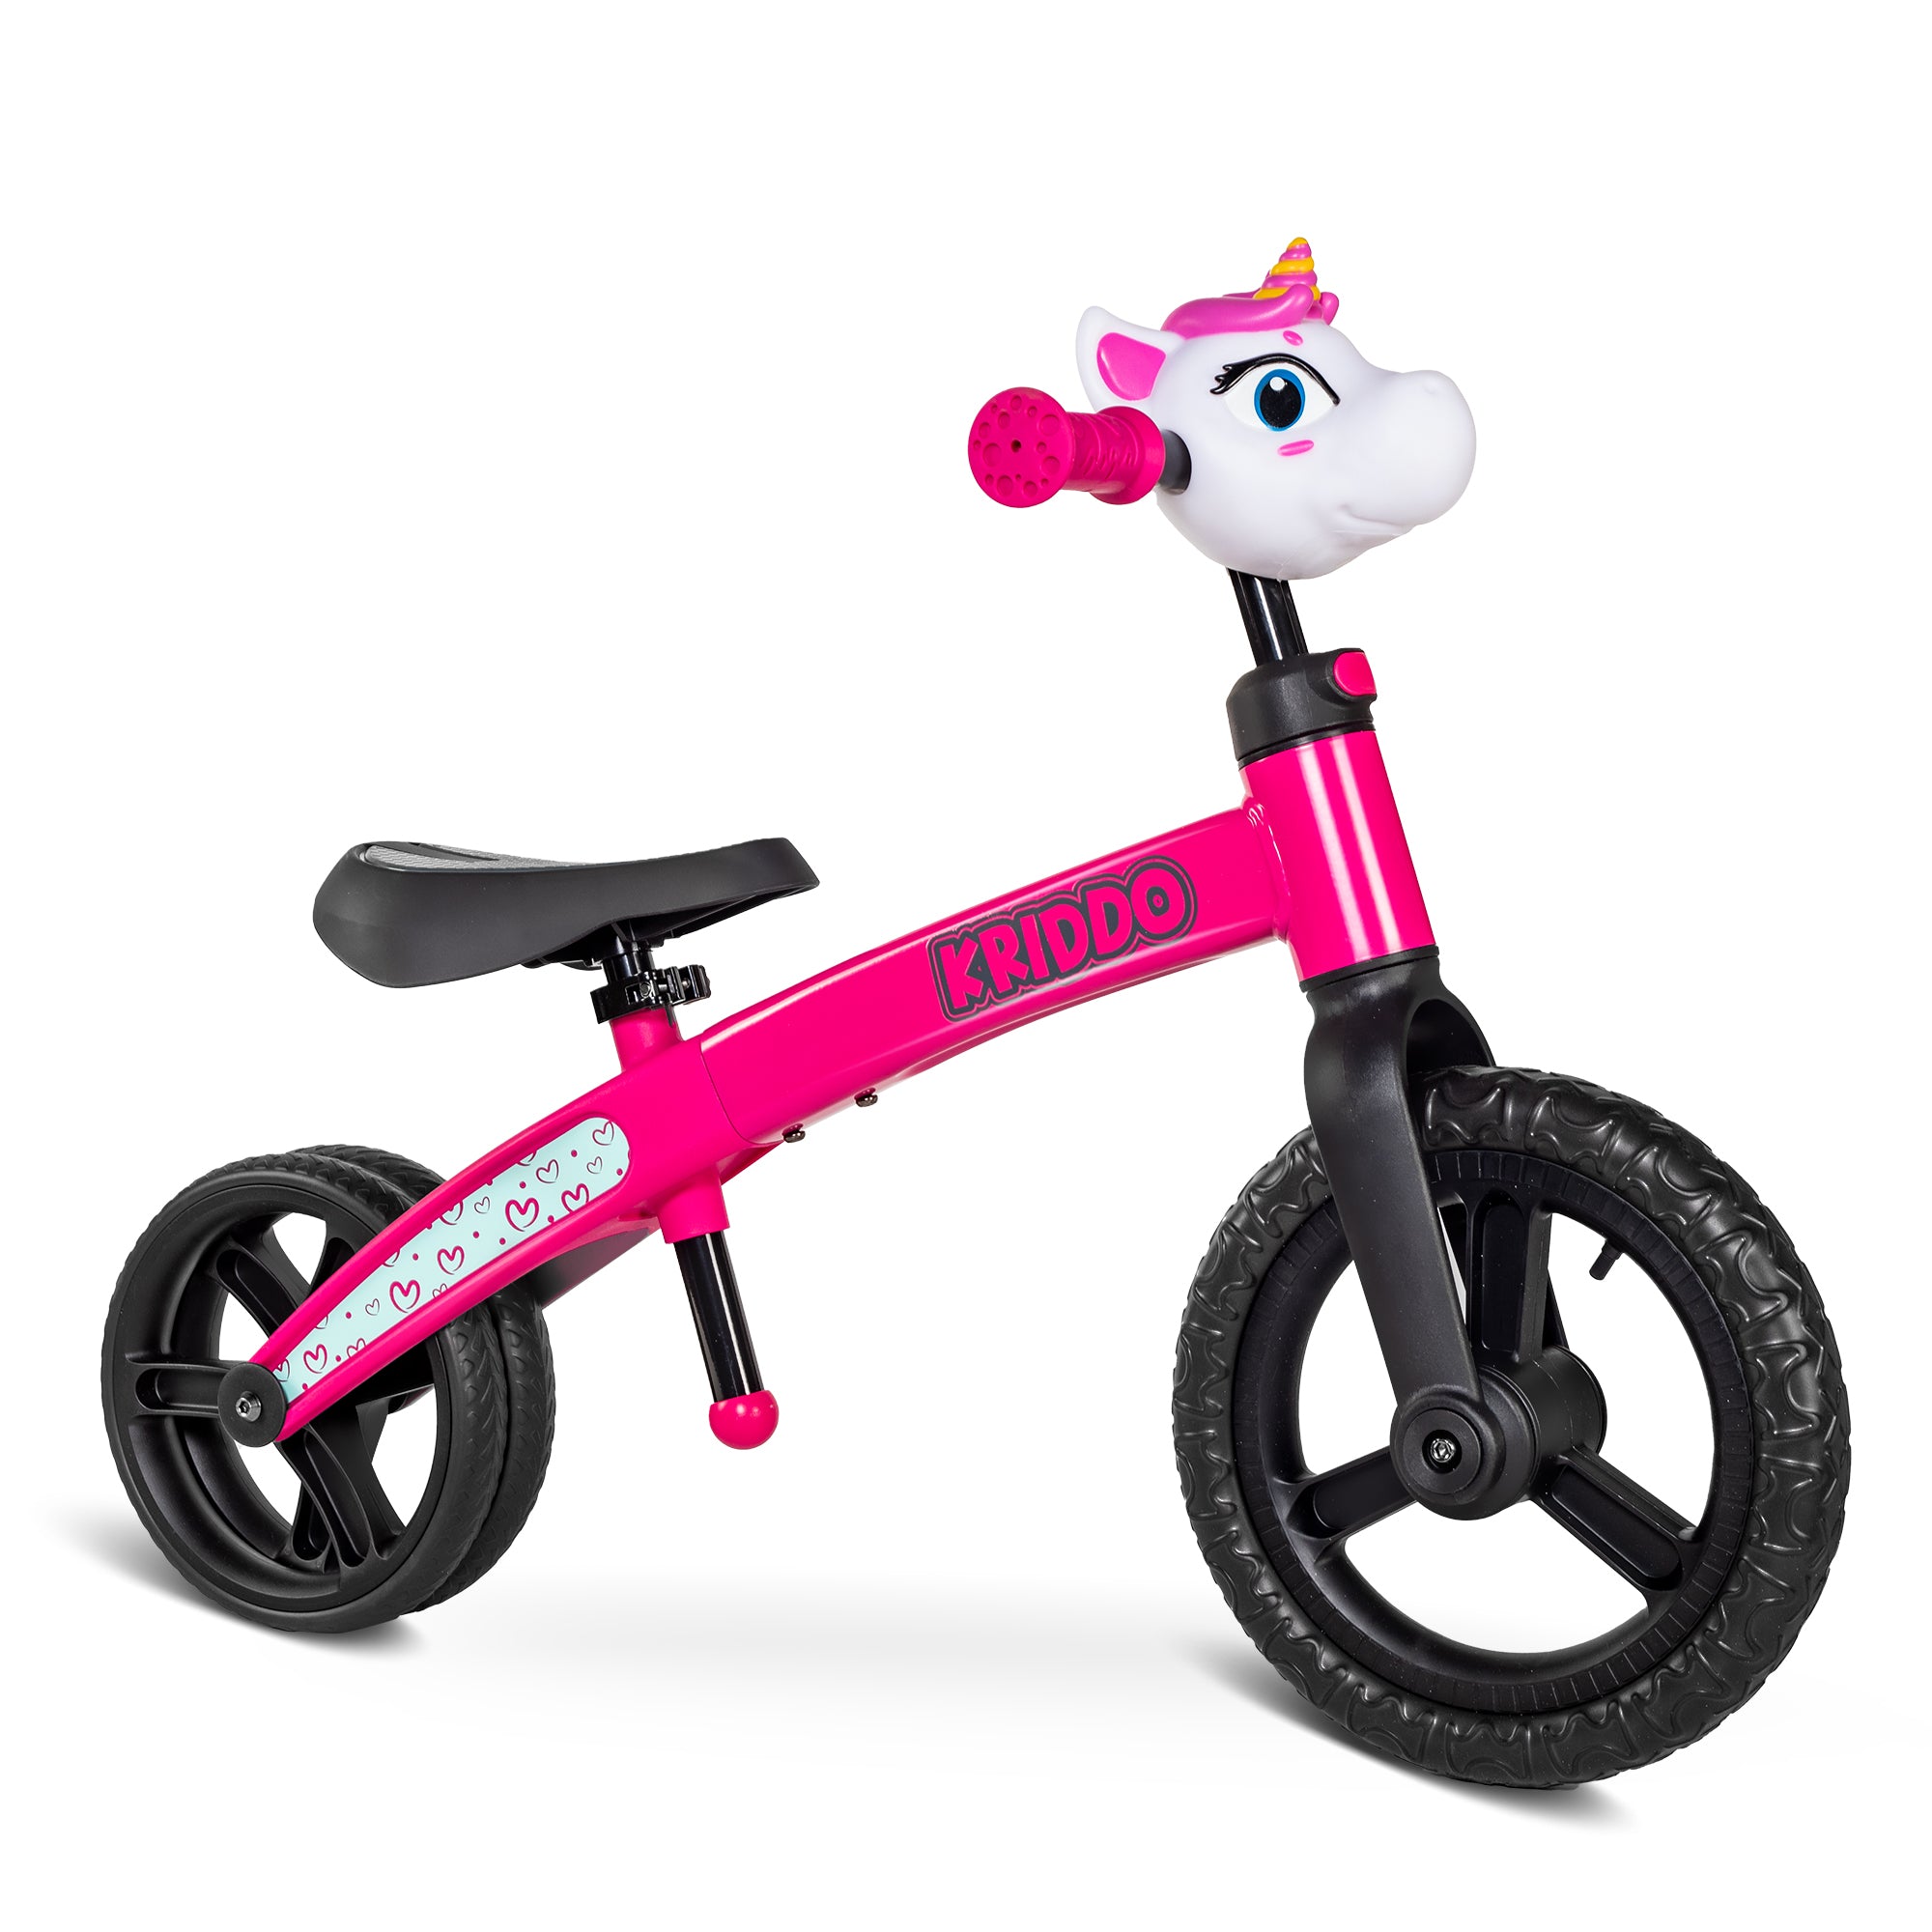 KRIDDO Toddler Balance Bike 2 Year Old, Age 18 Months to 5 Years Old, Early Learning Interactive Push Bicycle with Steady Balancing and Footrest, Gift for 2-5 Boys Girls, Pink Dual